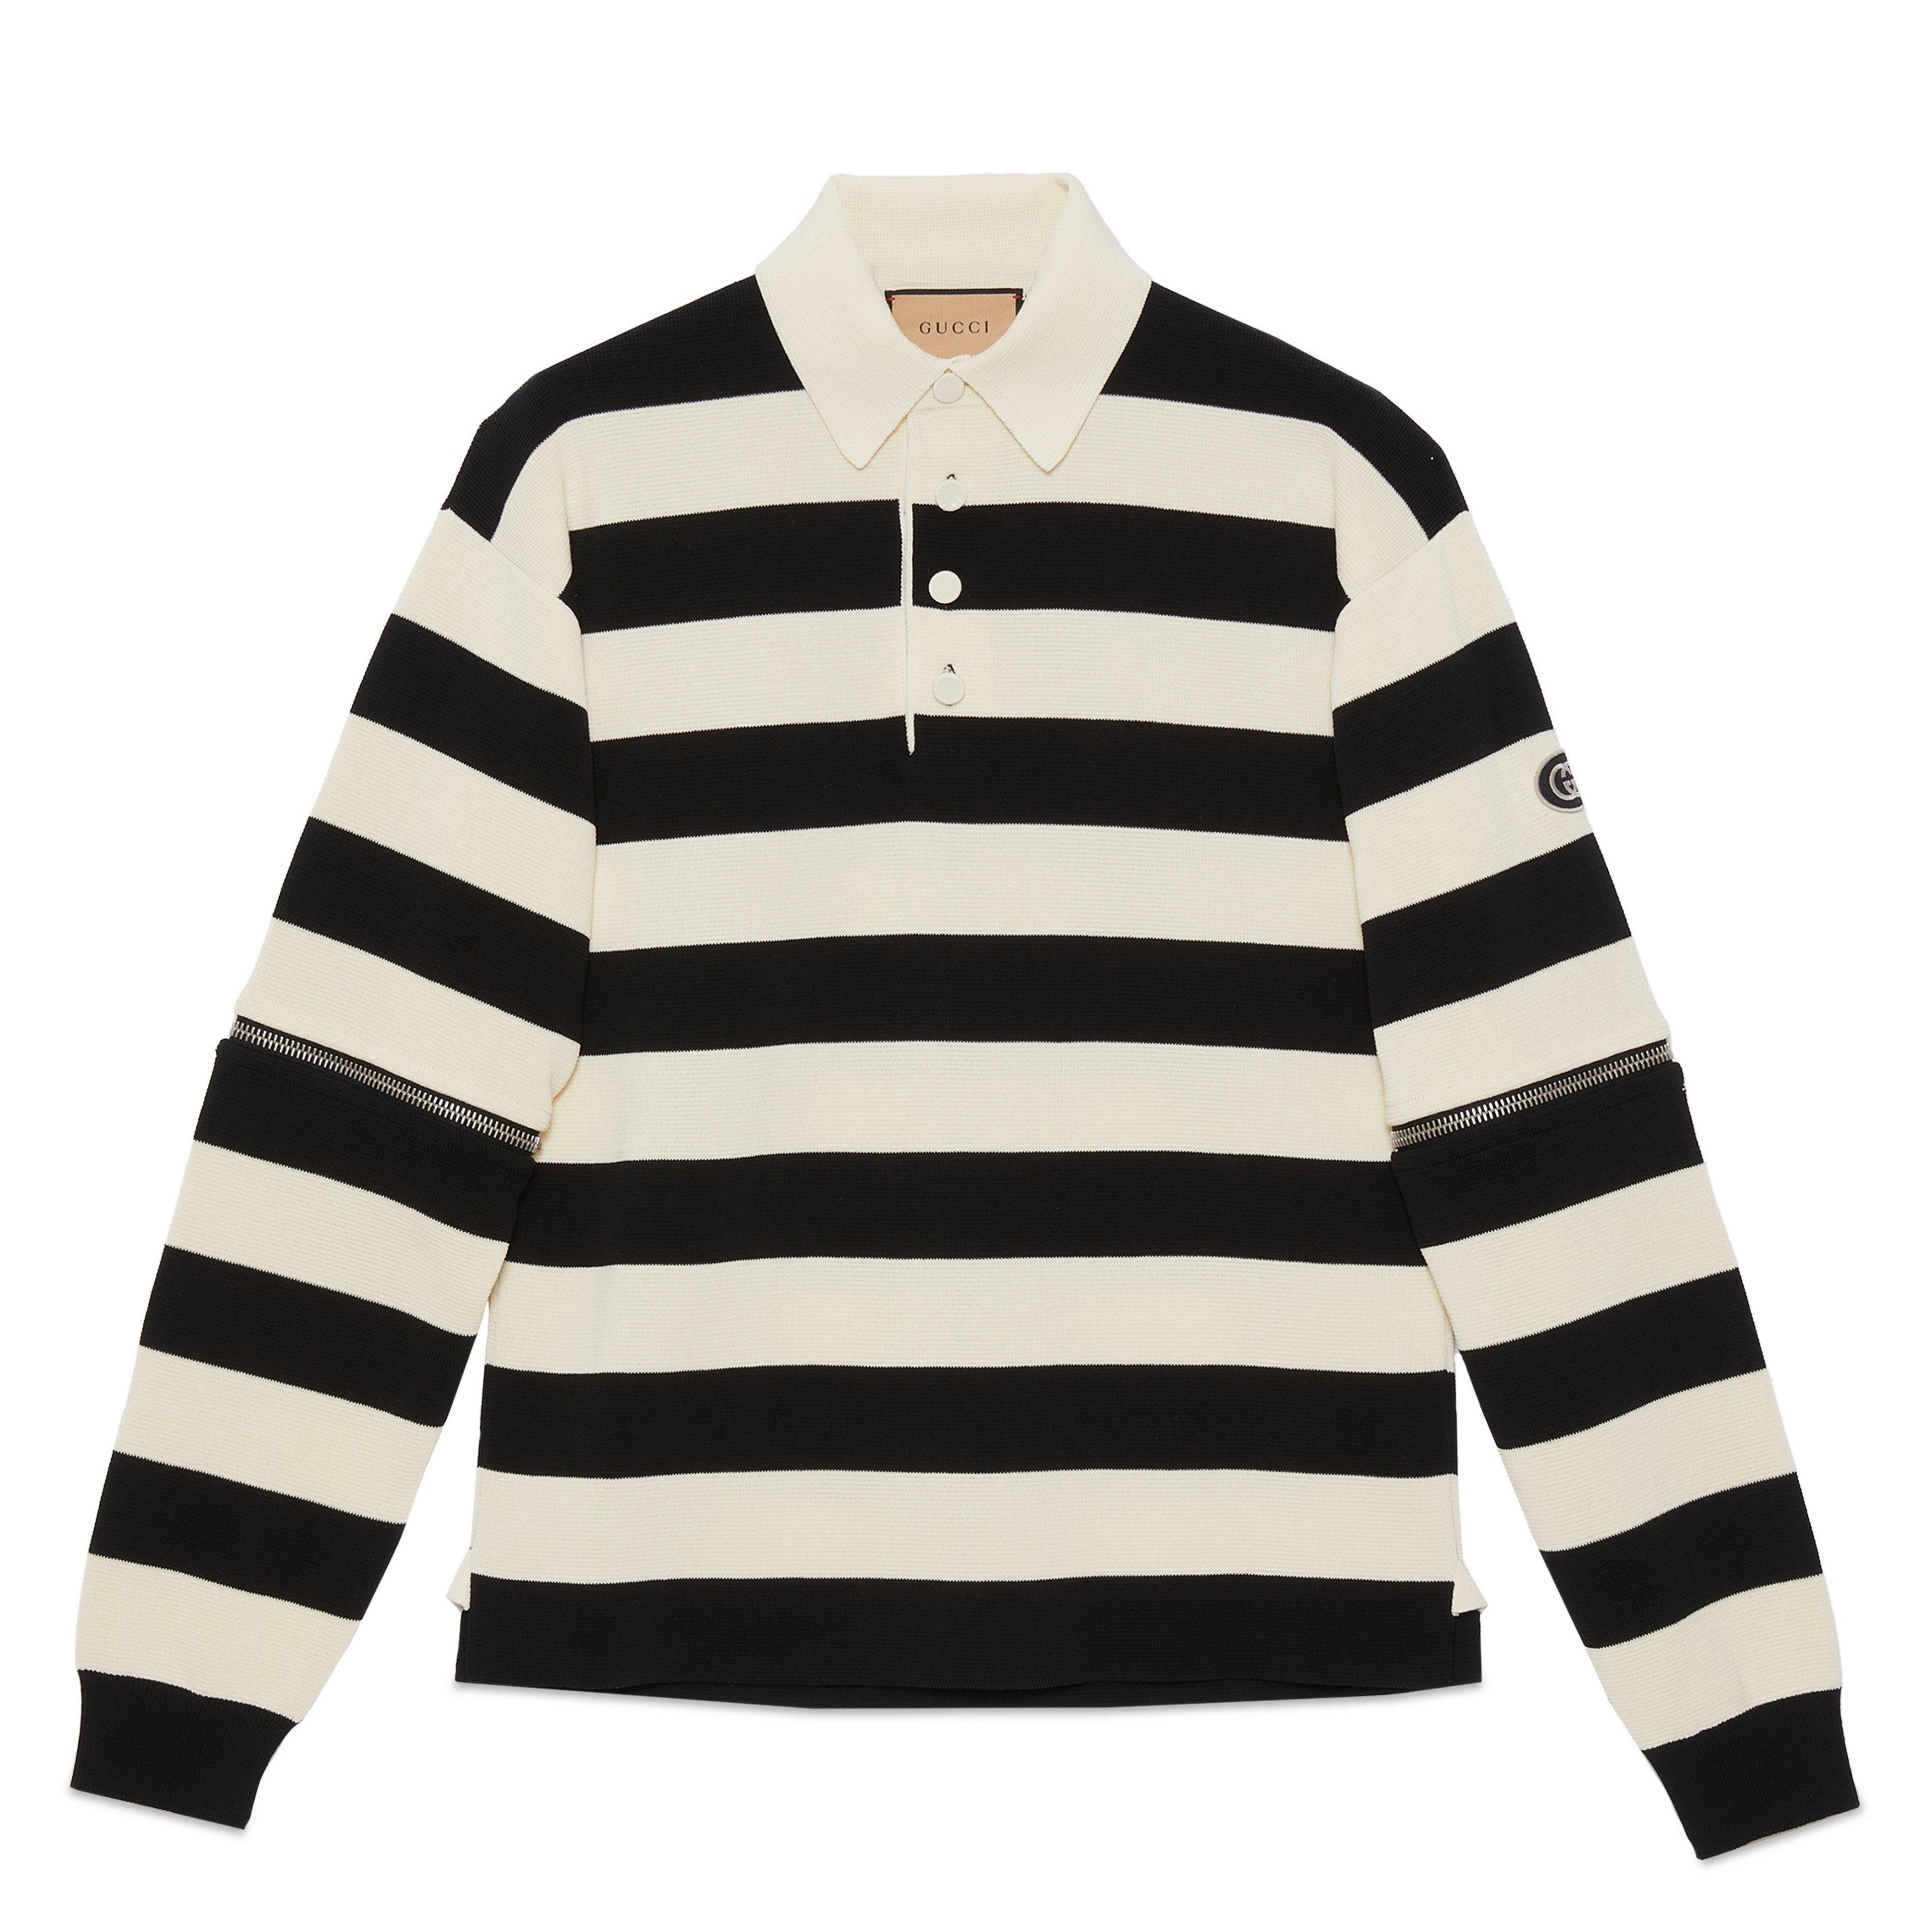 Gucci - Men’s Detachable Sleeves Knit Polo - (White/Black) by GUCCI